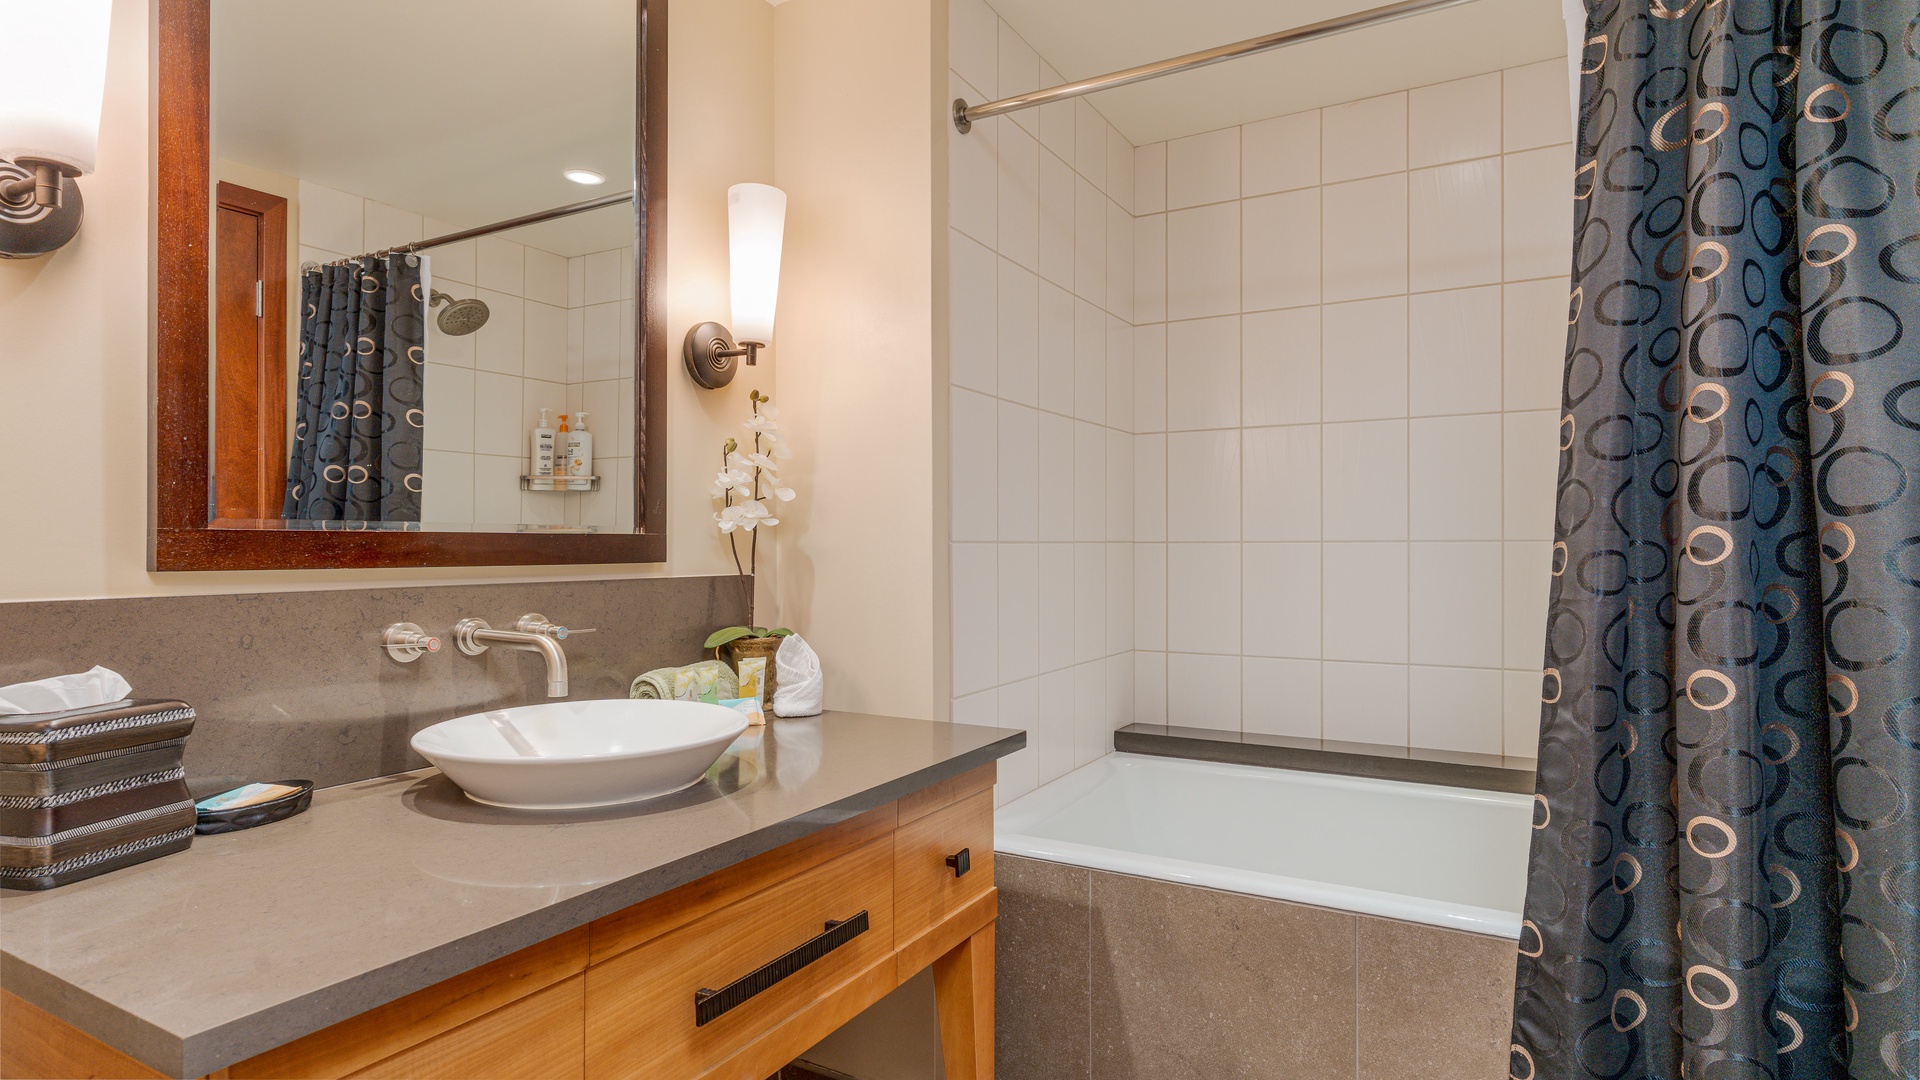 Kapolei Vacation Rentals, Ko Olina Beach Villas B1101 - The second guest bathroom featuring a shower and tub combo.